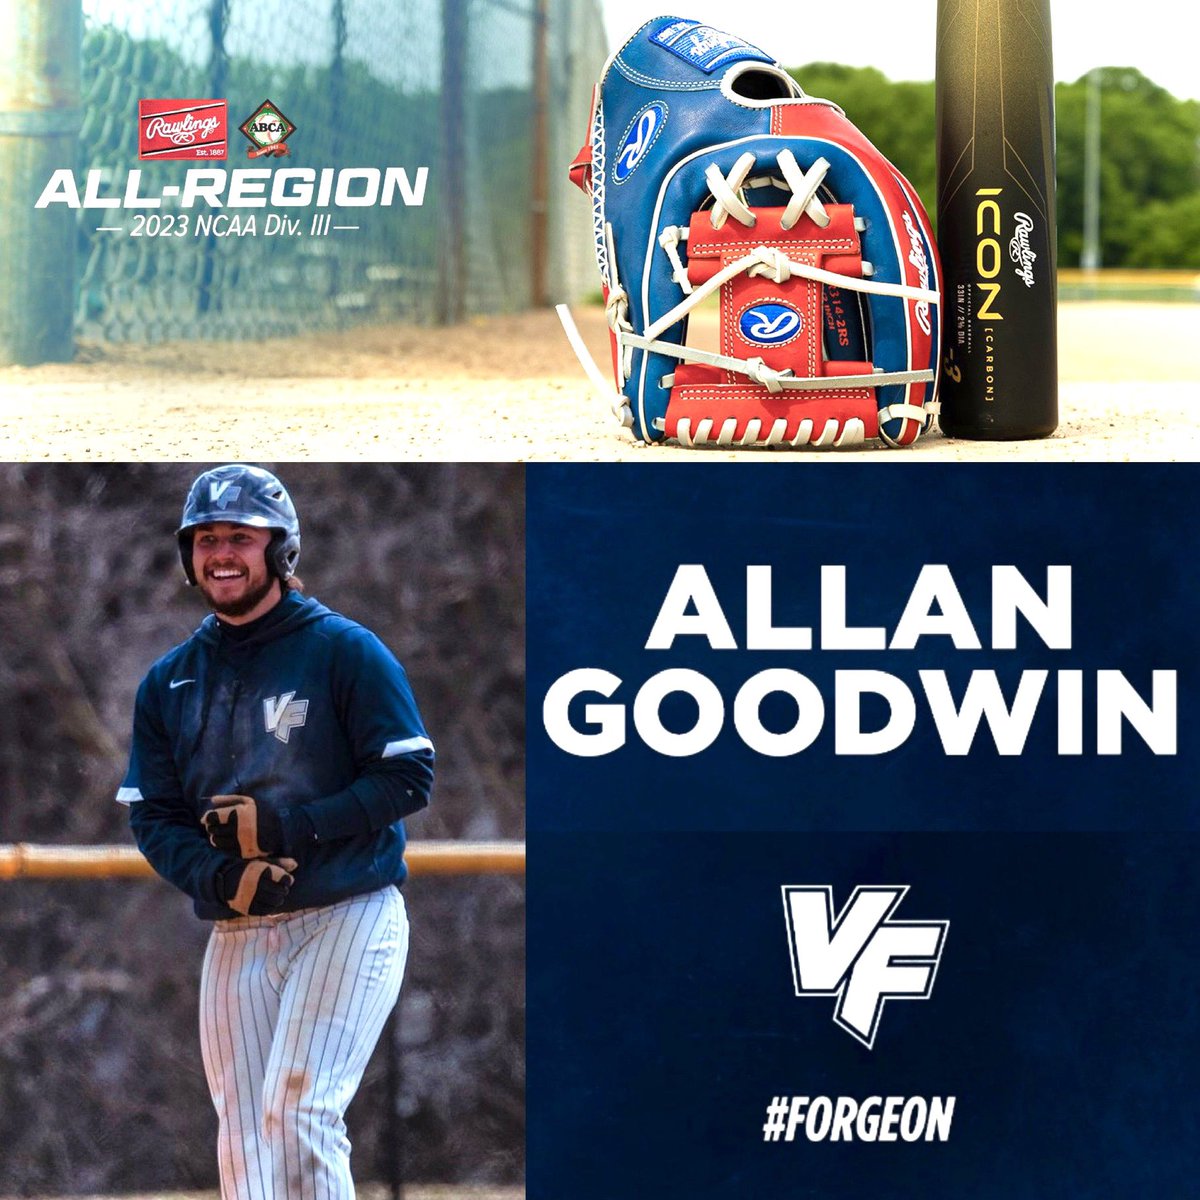 ‼️ Senior Allan Goodwin has been named a 2023 All-Region player by the @ABCA1945 !!! Allan becomes the 1st player in program history to achieve this recognition. Congrats to Allan on his history making season at UVF!!! @RawlingsSports #ForgeOn⚒️